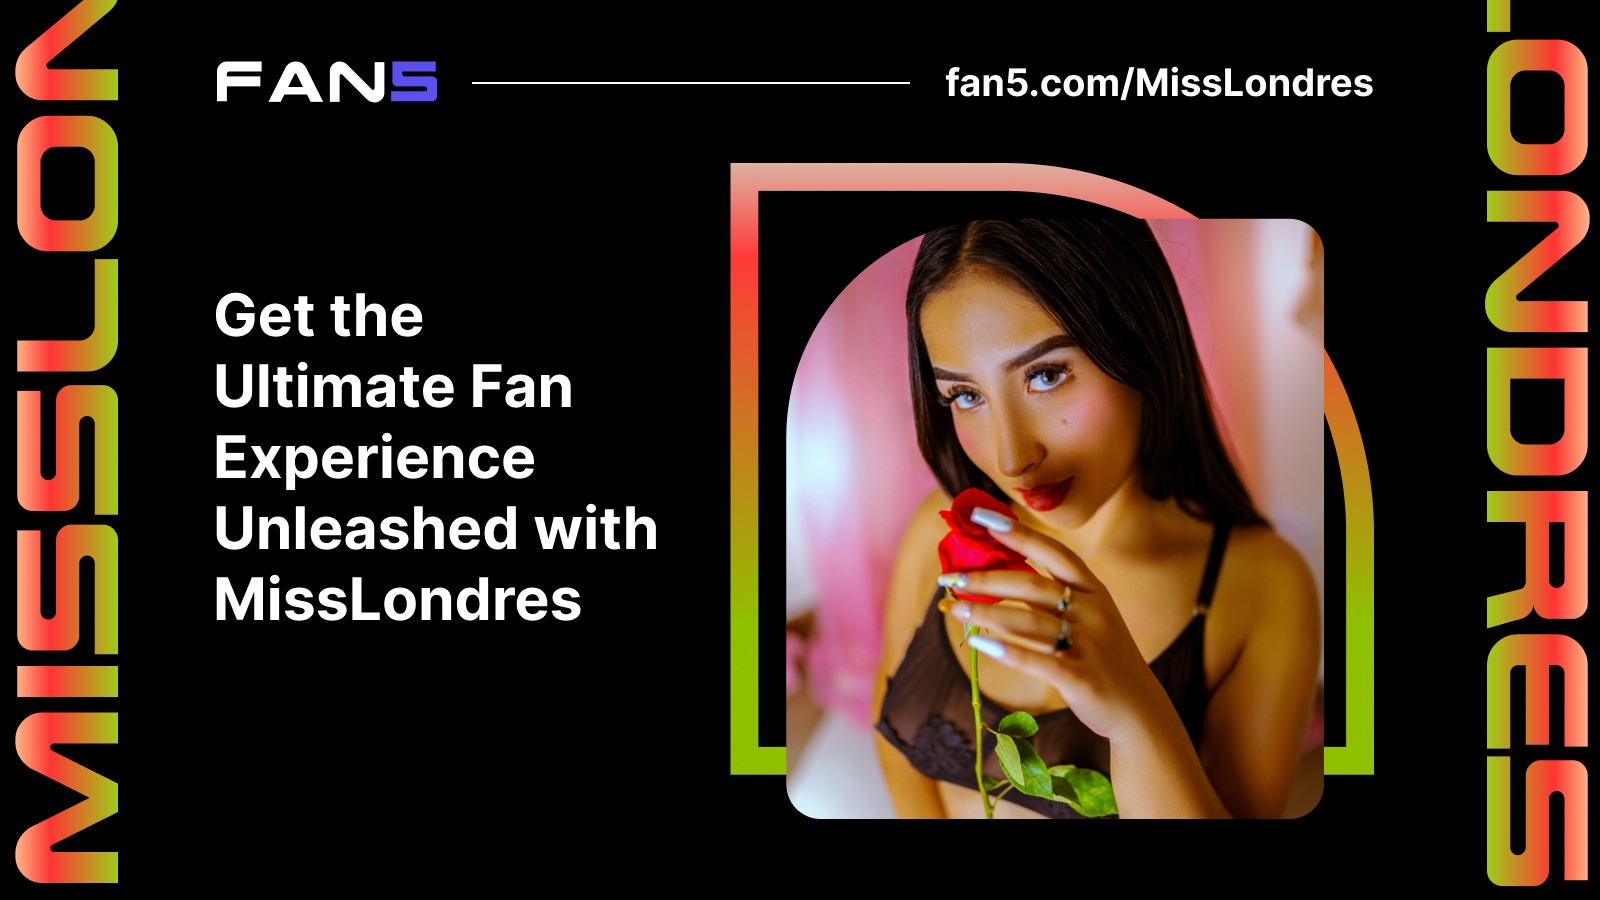 Miss Londres: Building Passionate Dreams With Love and Perseverance